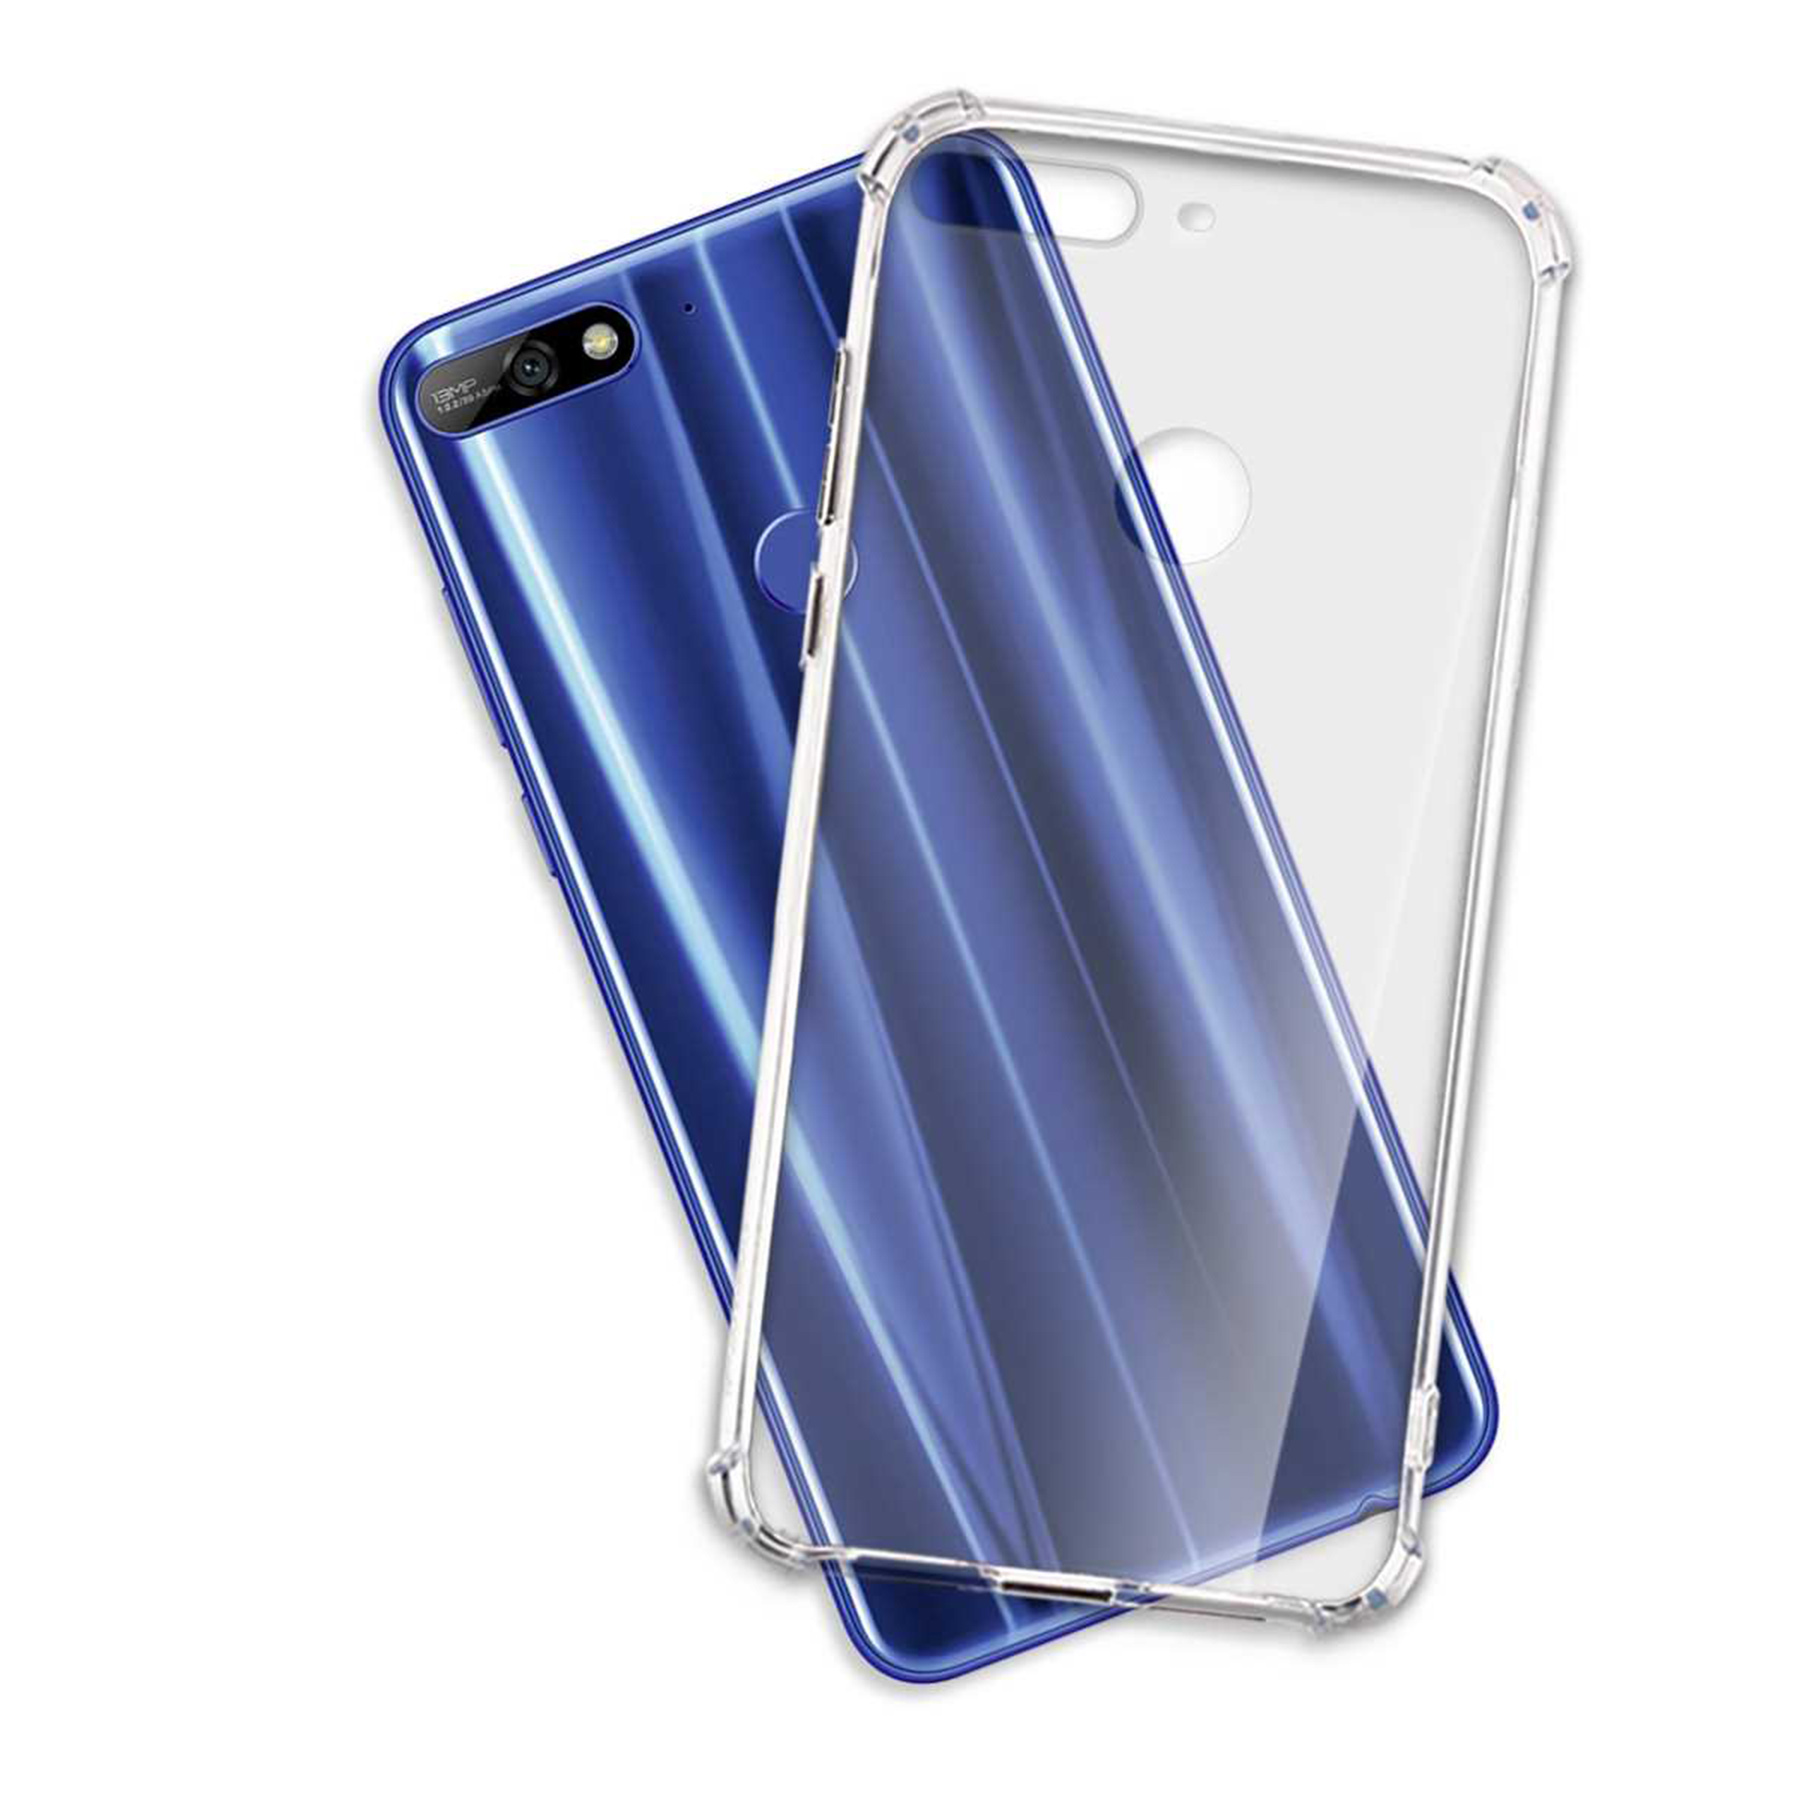 Case, Y7 MTB 7C, Huawei, MORE Honor Transparent ENERGY 2018, 2018, Backcover, Clear Prime Y7 Armor